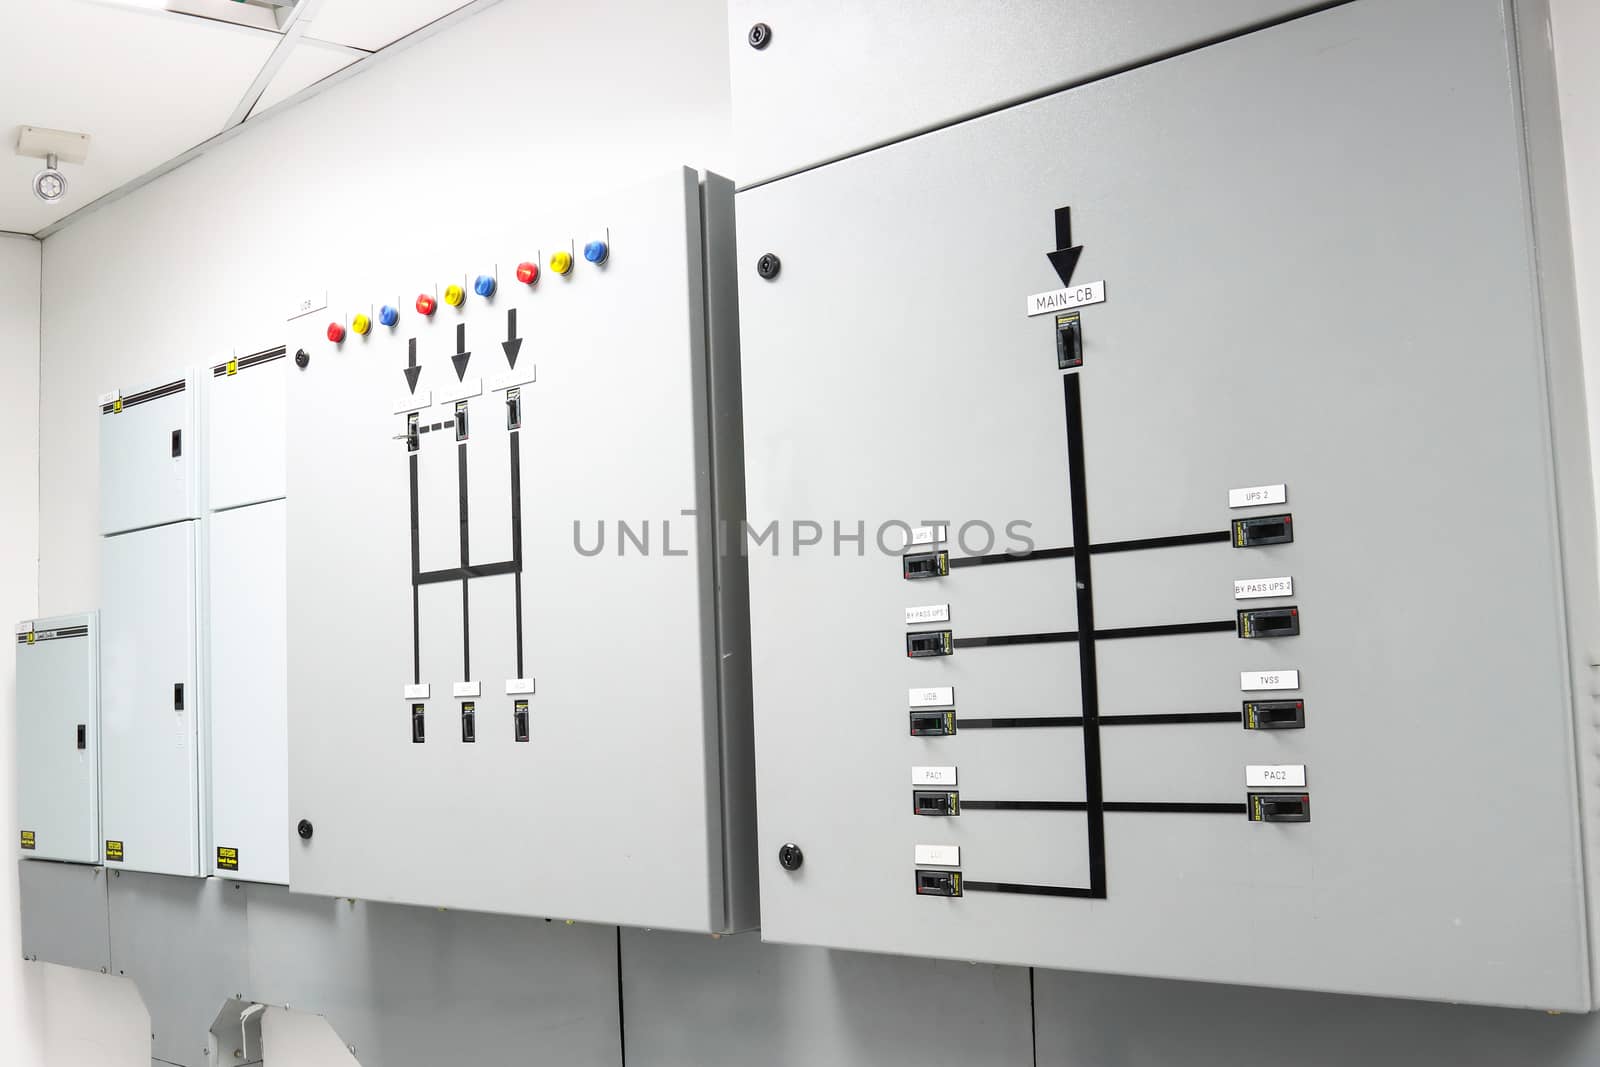 Main Distribution Board Control the power failure from the building switch panel of power plant. Control UPS Indoor High Voltage Vacuum DC Circuit Breaker